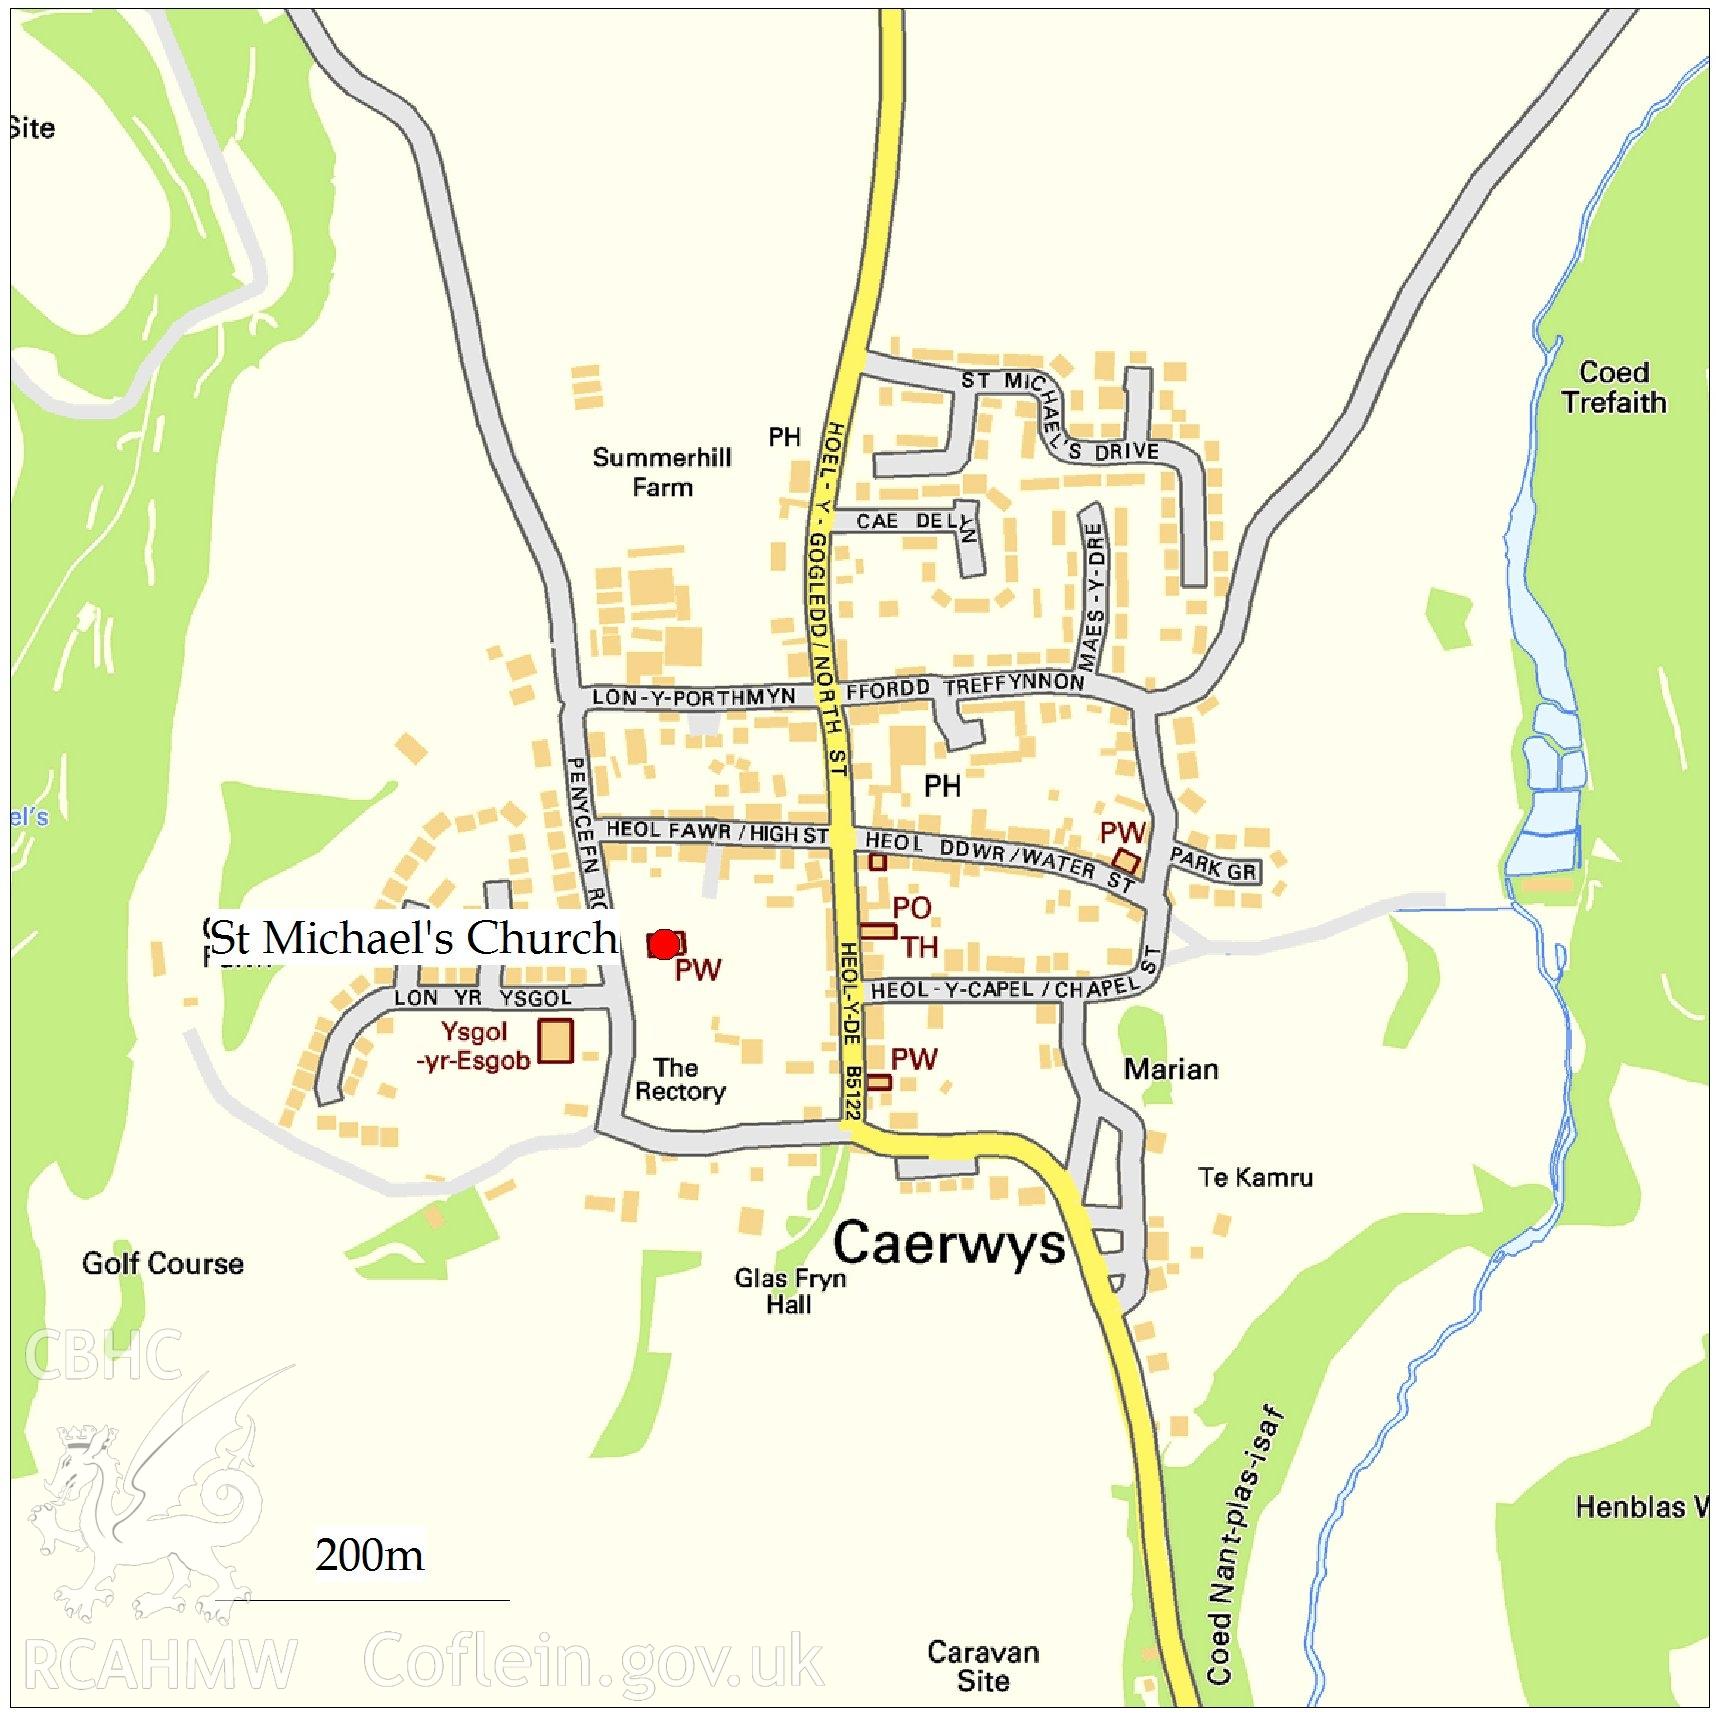 Report illustration produced during archaeological watching brief of St. Michael's Church, Caerwys, Flintshire, 2017. Comprises single cartographic image of Caerwys village.